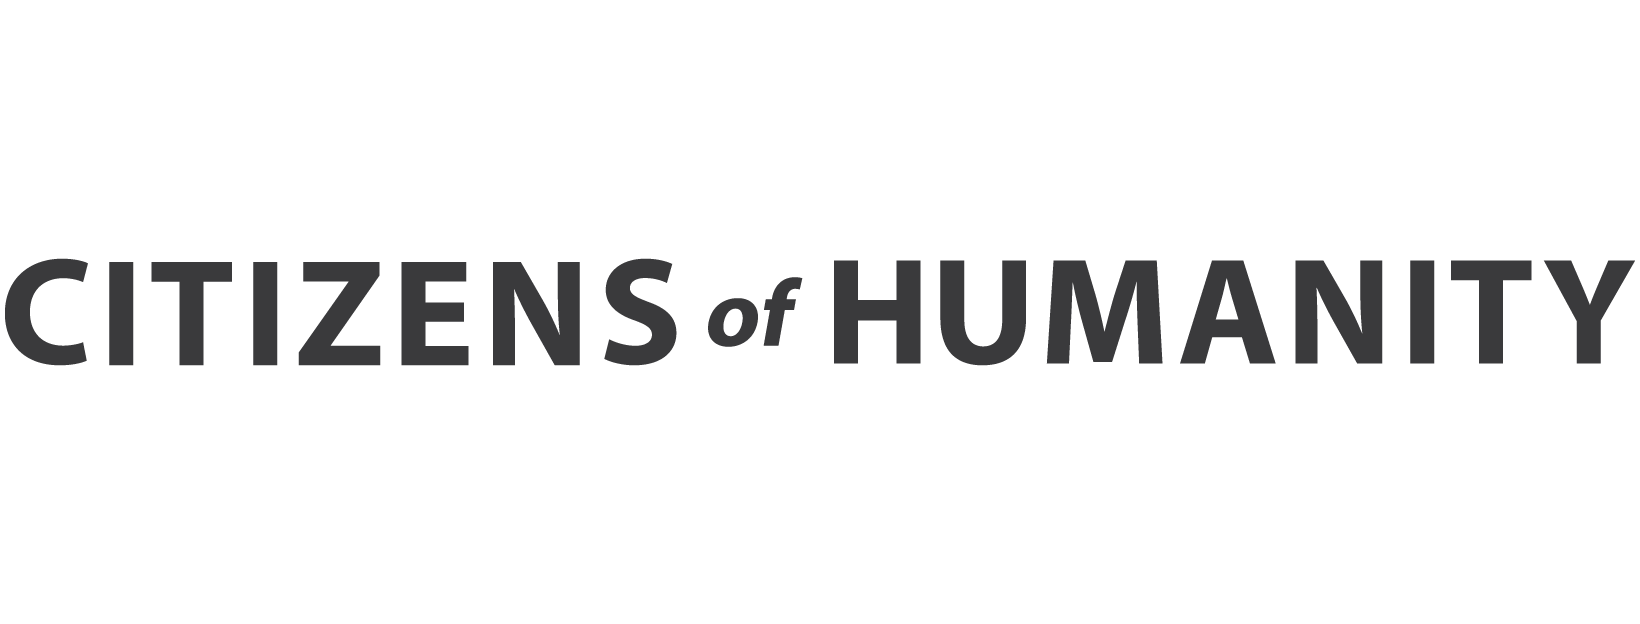 Citizens of Humanity  logo